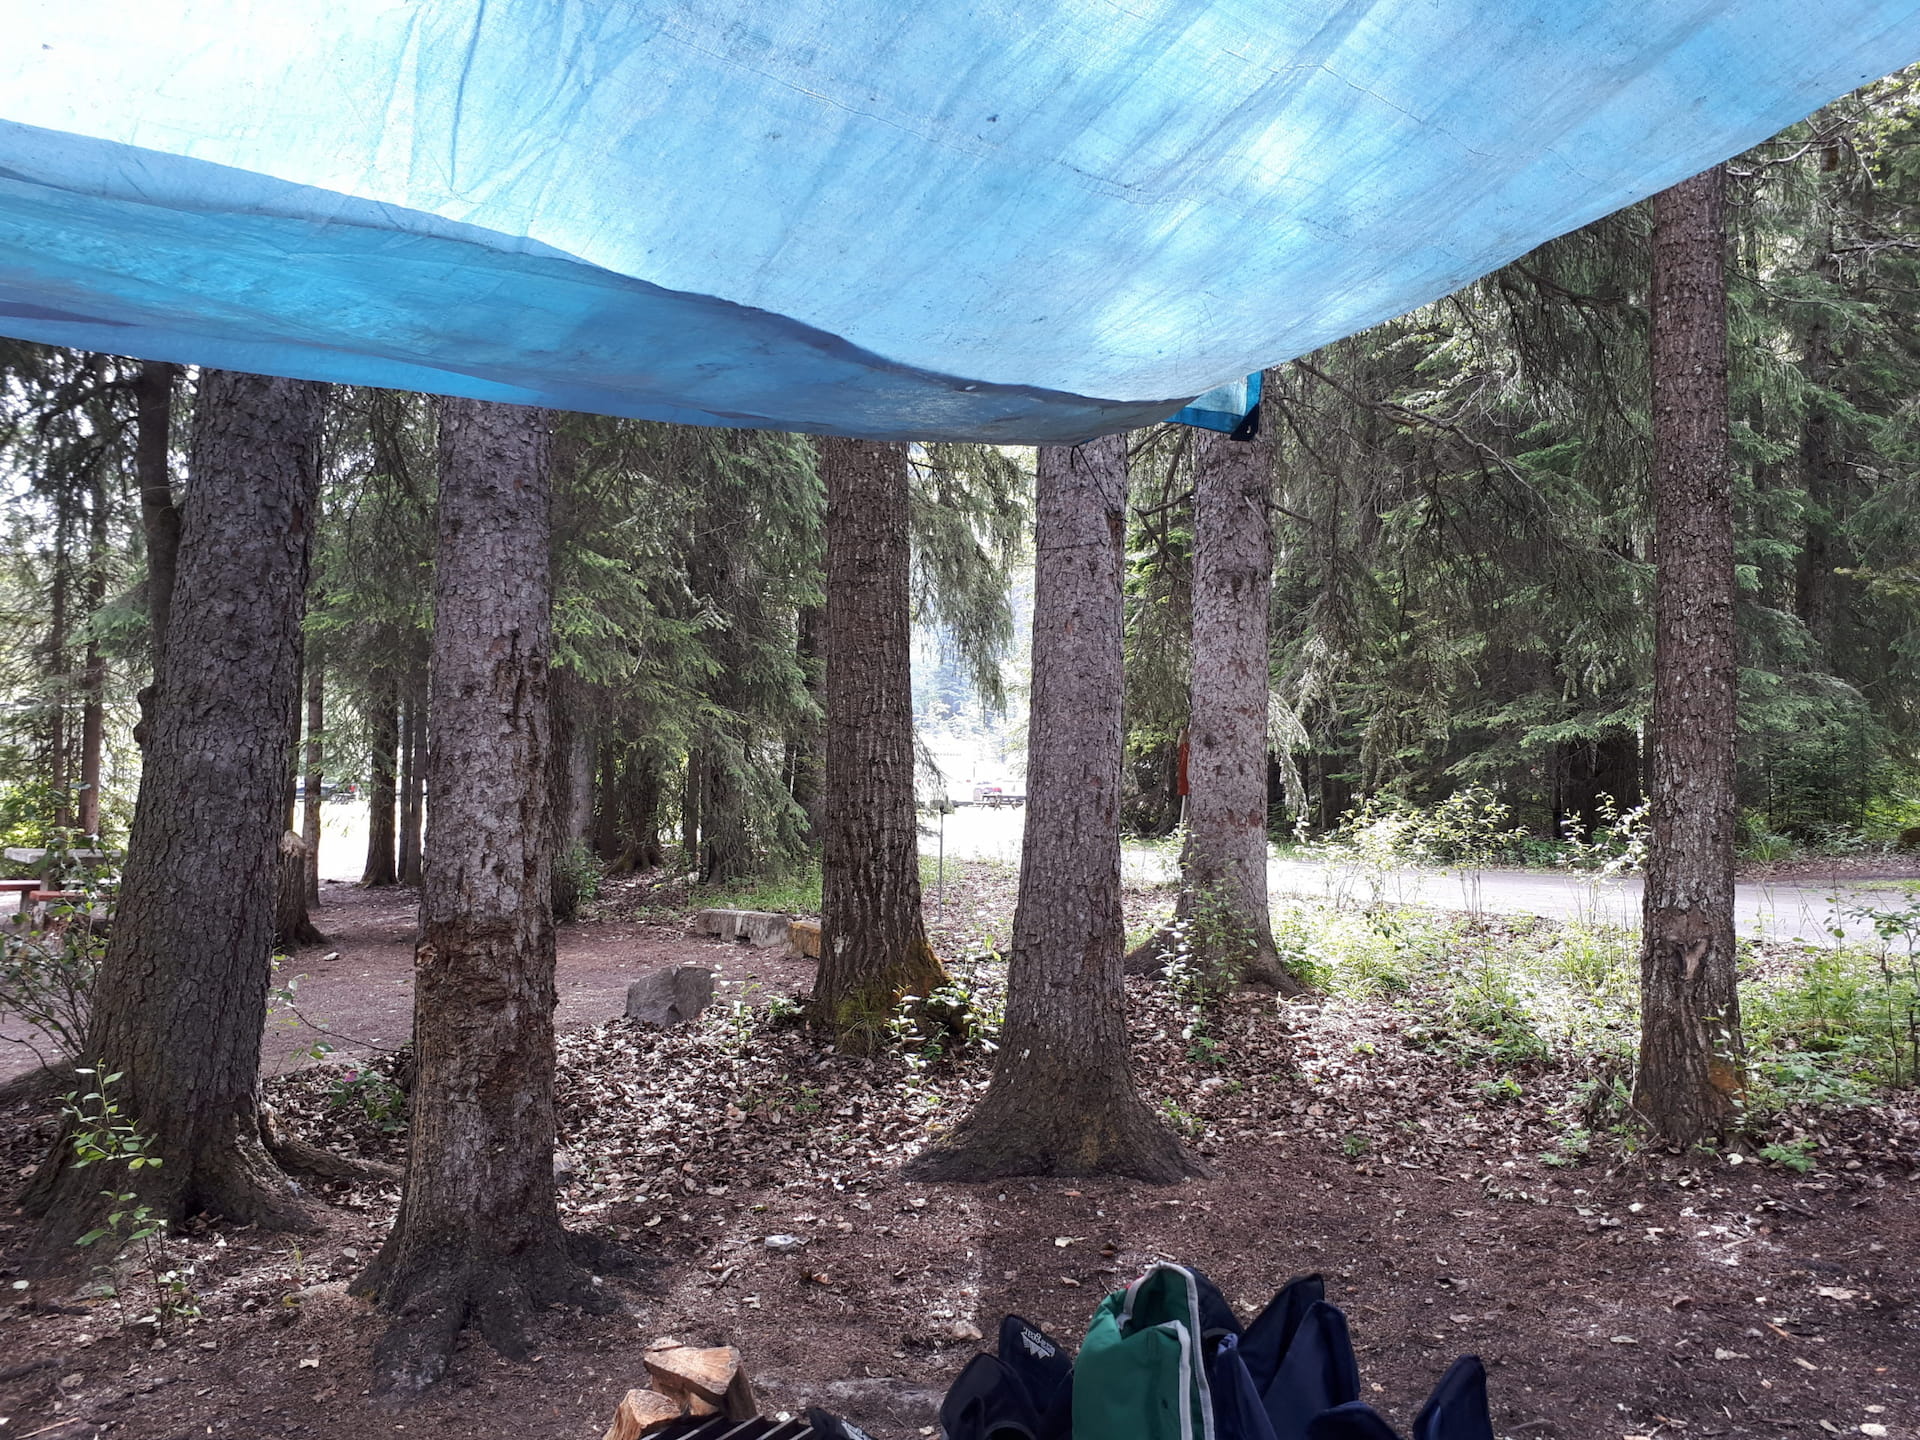 View of a campsite at Kicking Horse Campground. There are tall trees bordering the site with a fire pit. There is a tarp put up and chairs folded up.